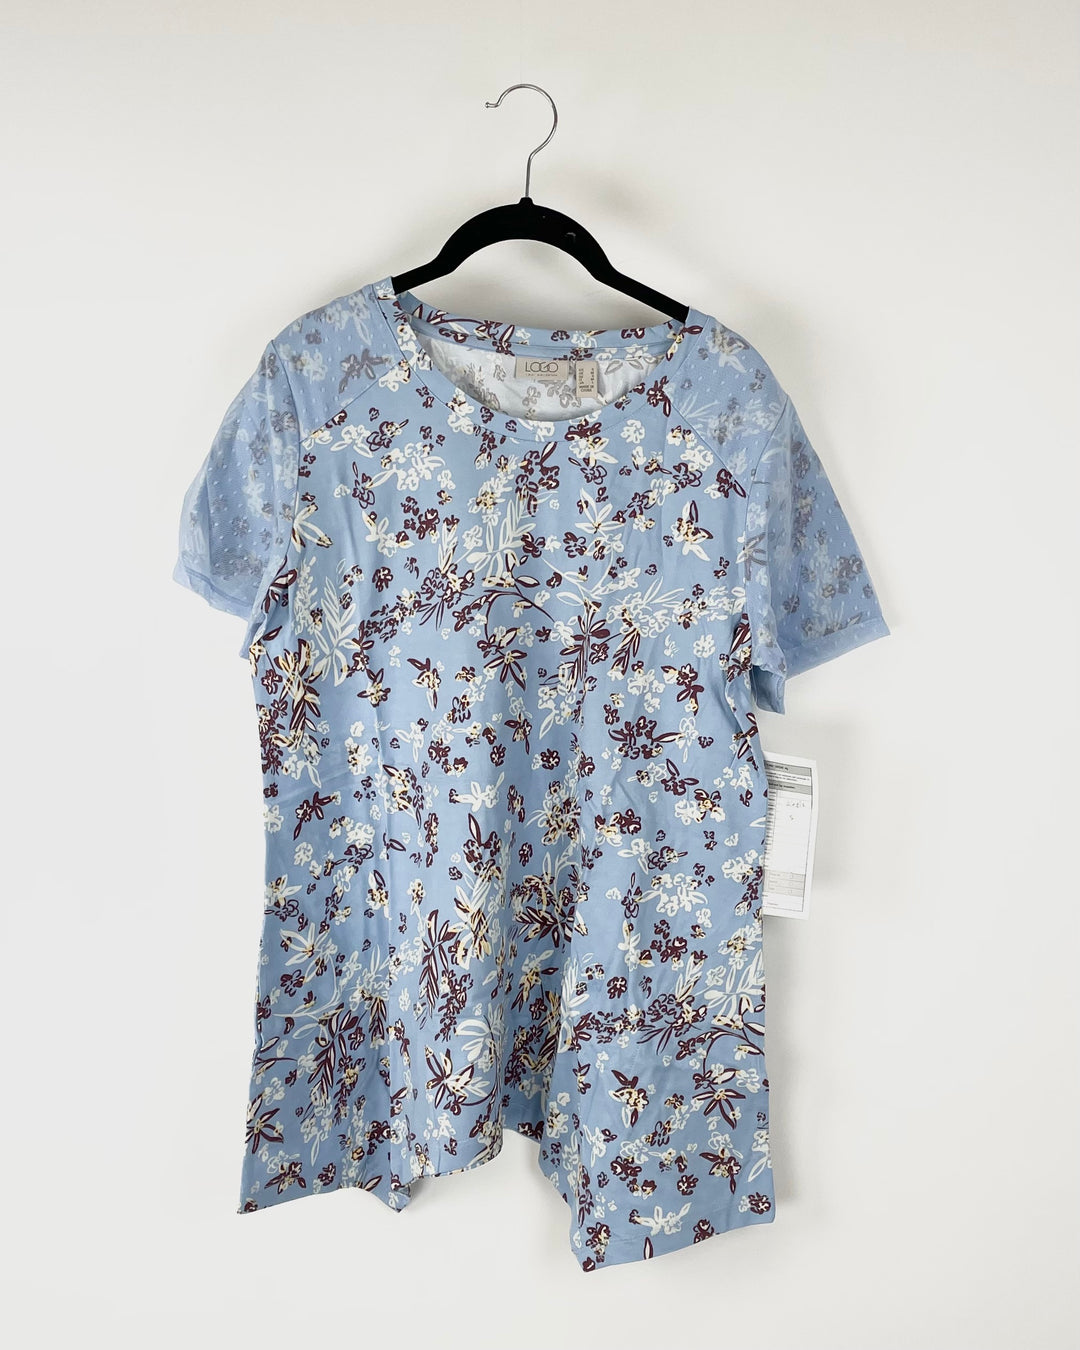 Blue Floral T-Shirt With Lace Sleeves - Size 6-8